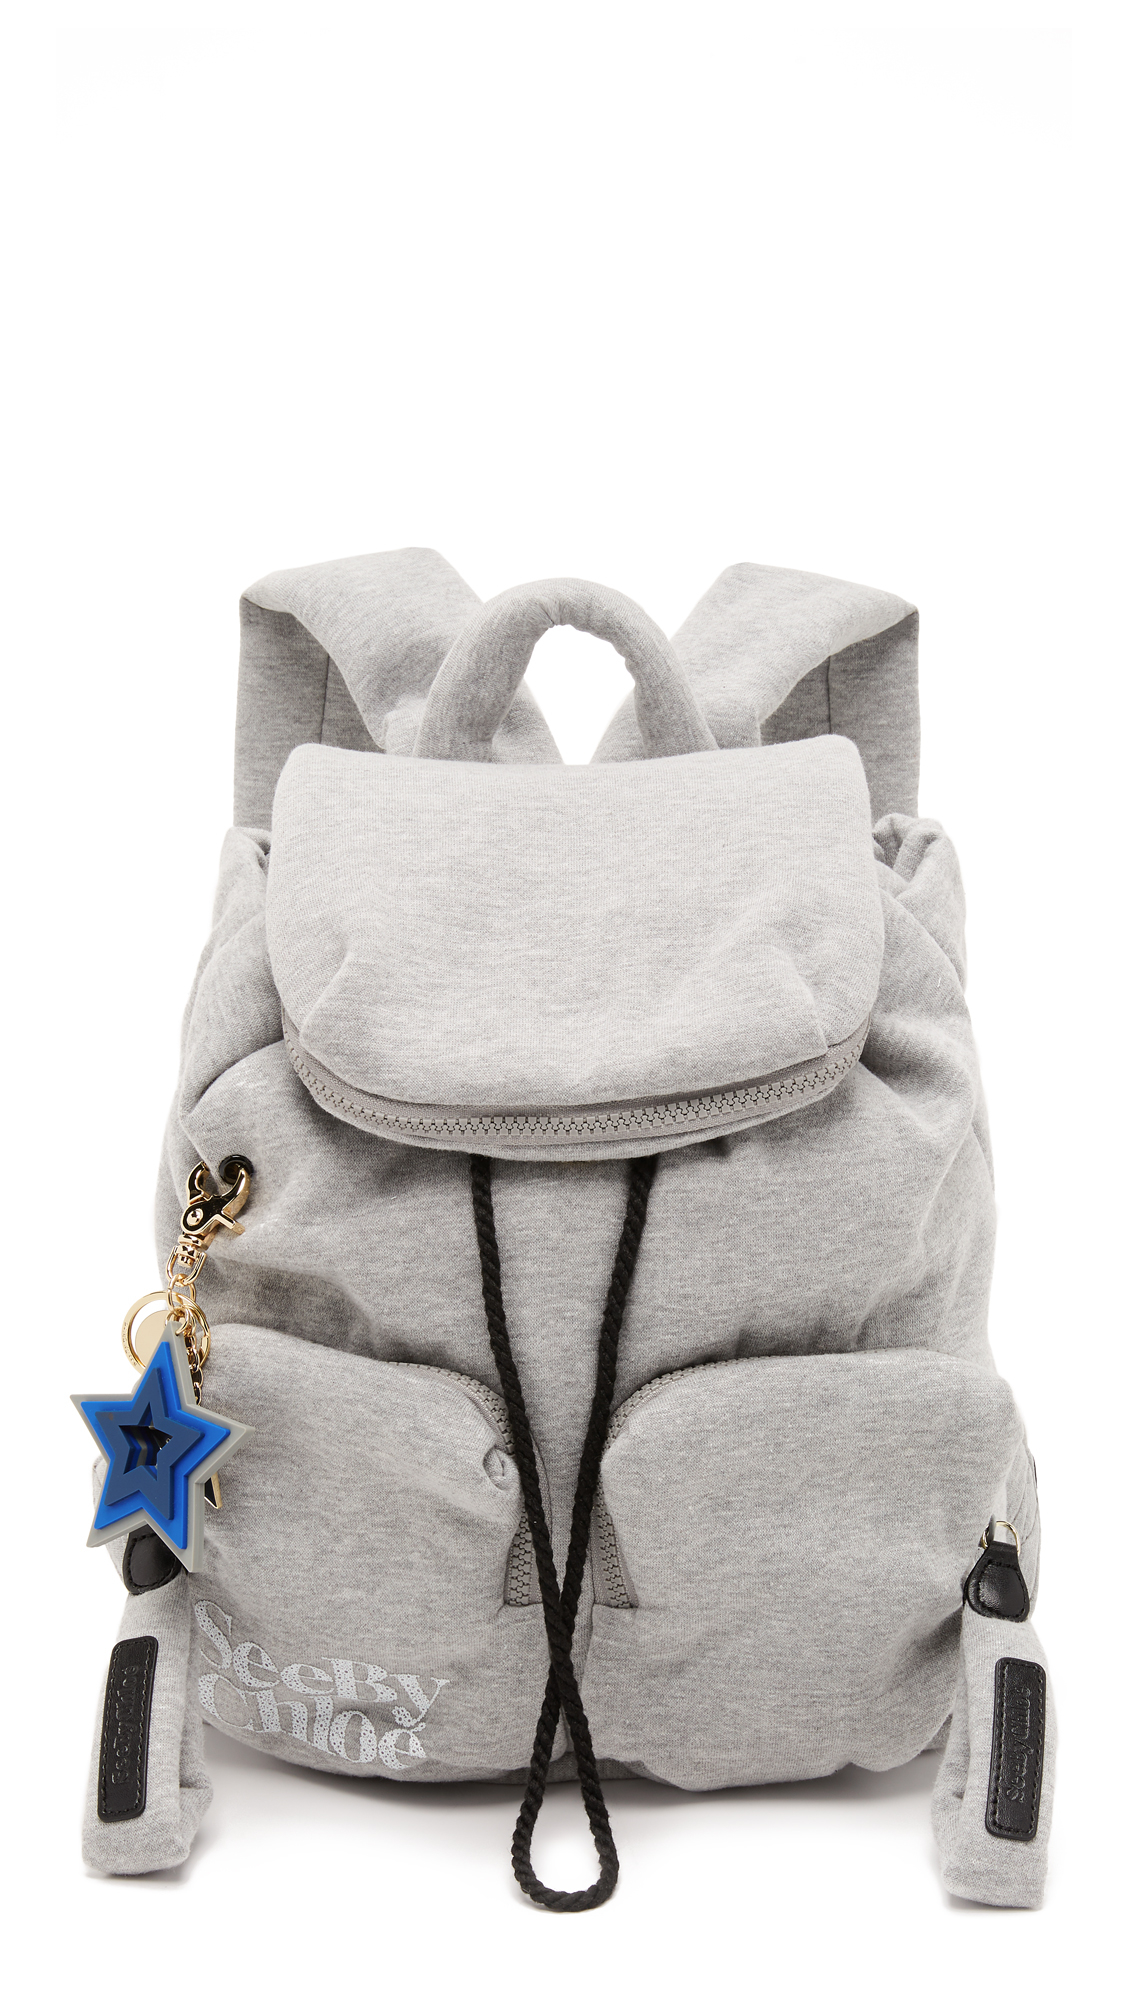 Chloe Backpack Grey | escapeauthority.com